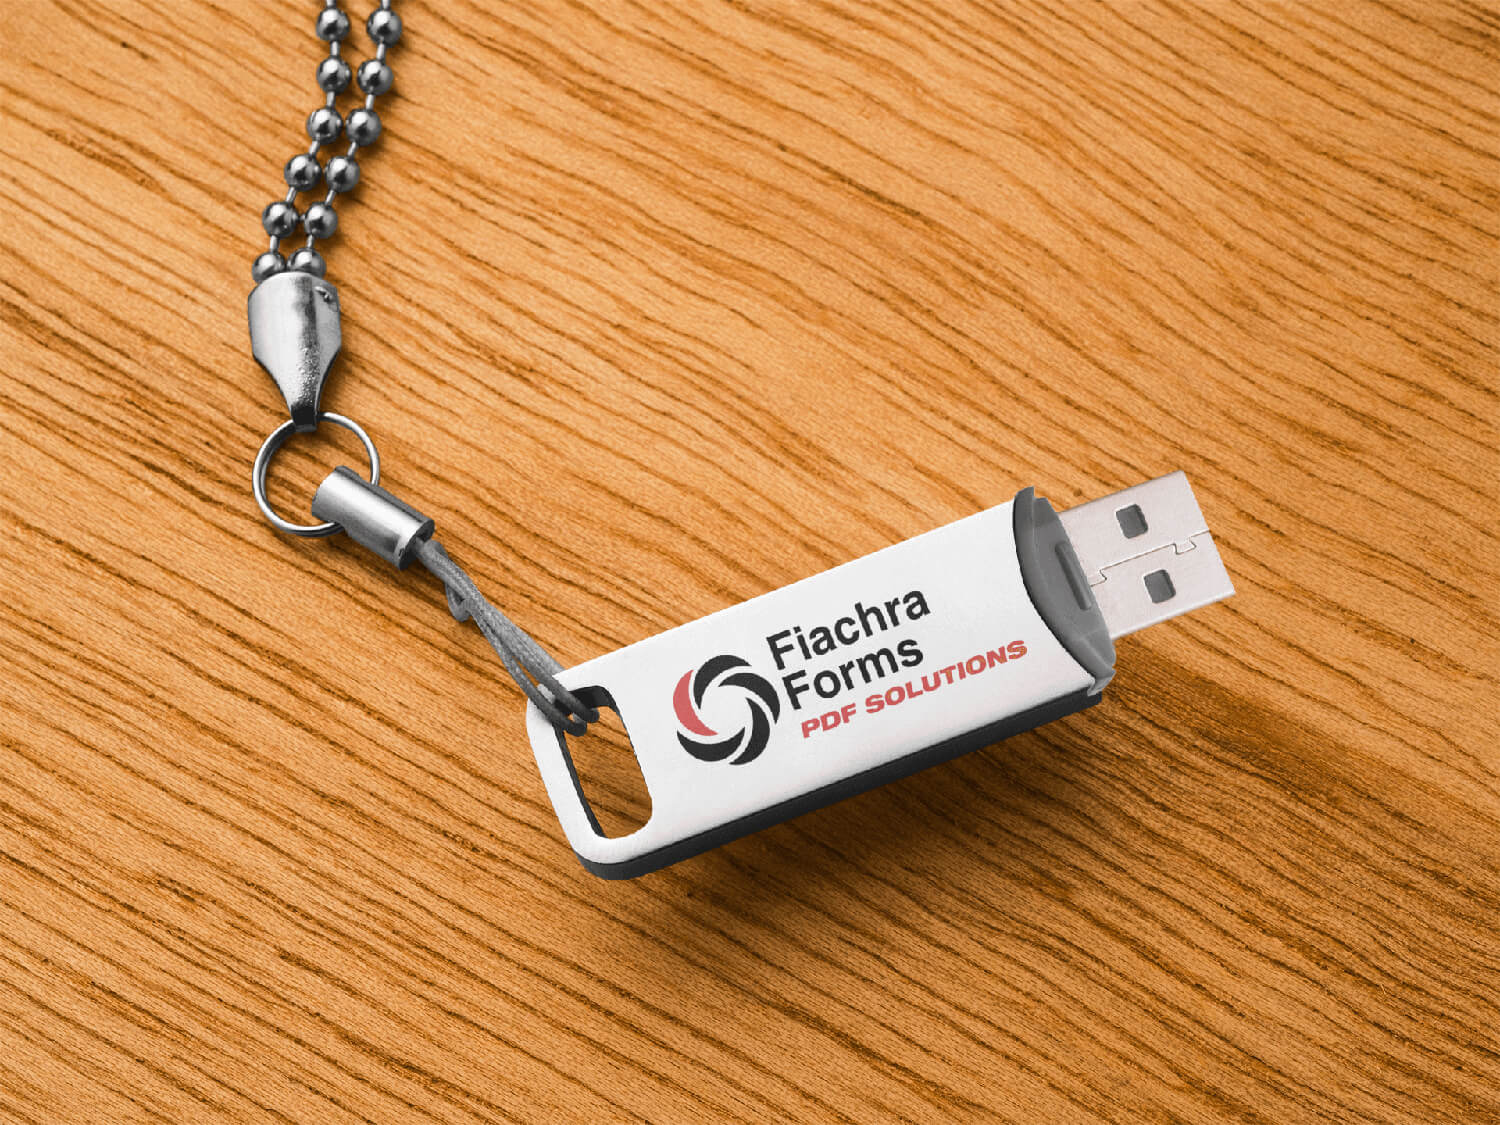 Follow the HIPAA Guidelines when using a USB